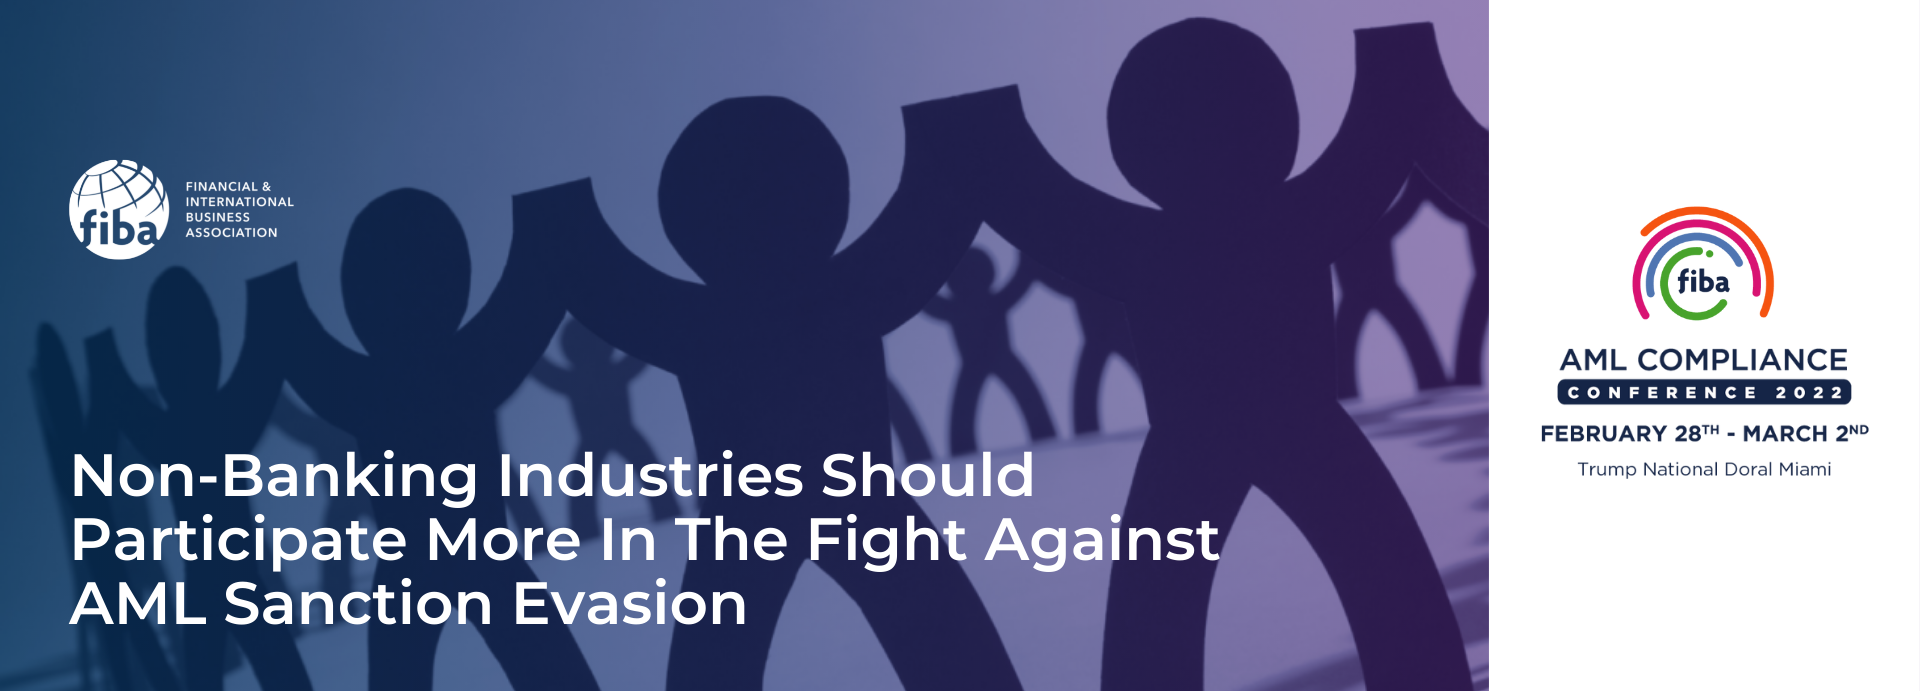 Non-Banking Industries Should Participate More In The Fight Against AML Sanction Evasion